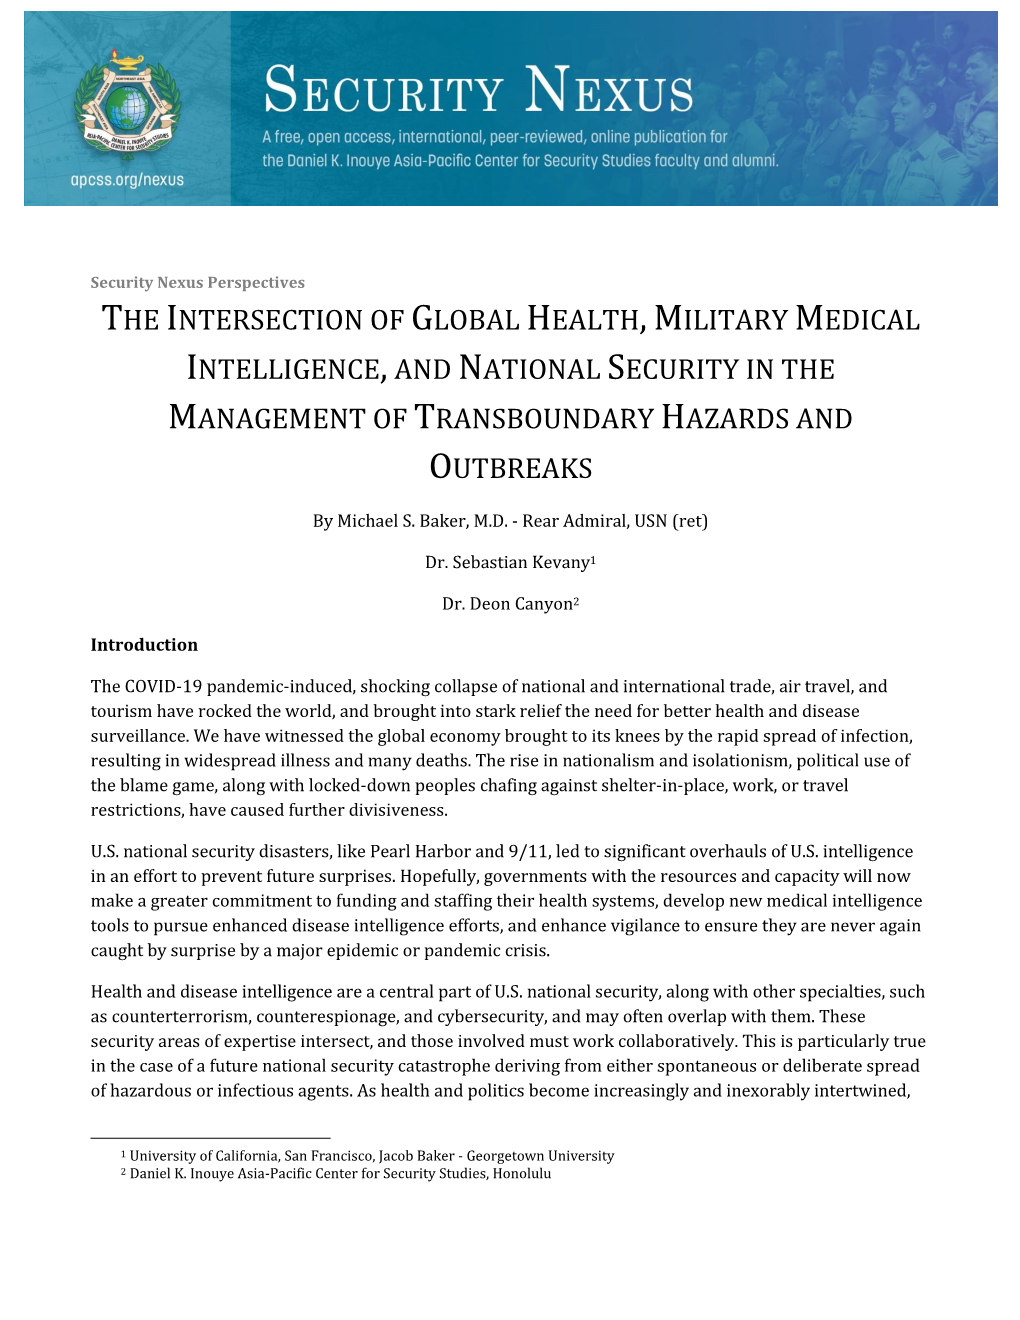 The Intersection of Global Health,Military Medical